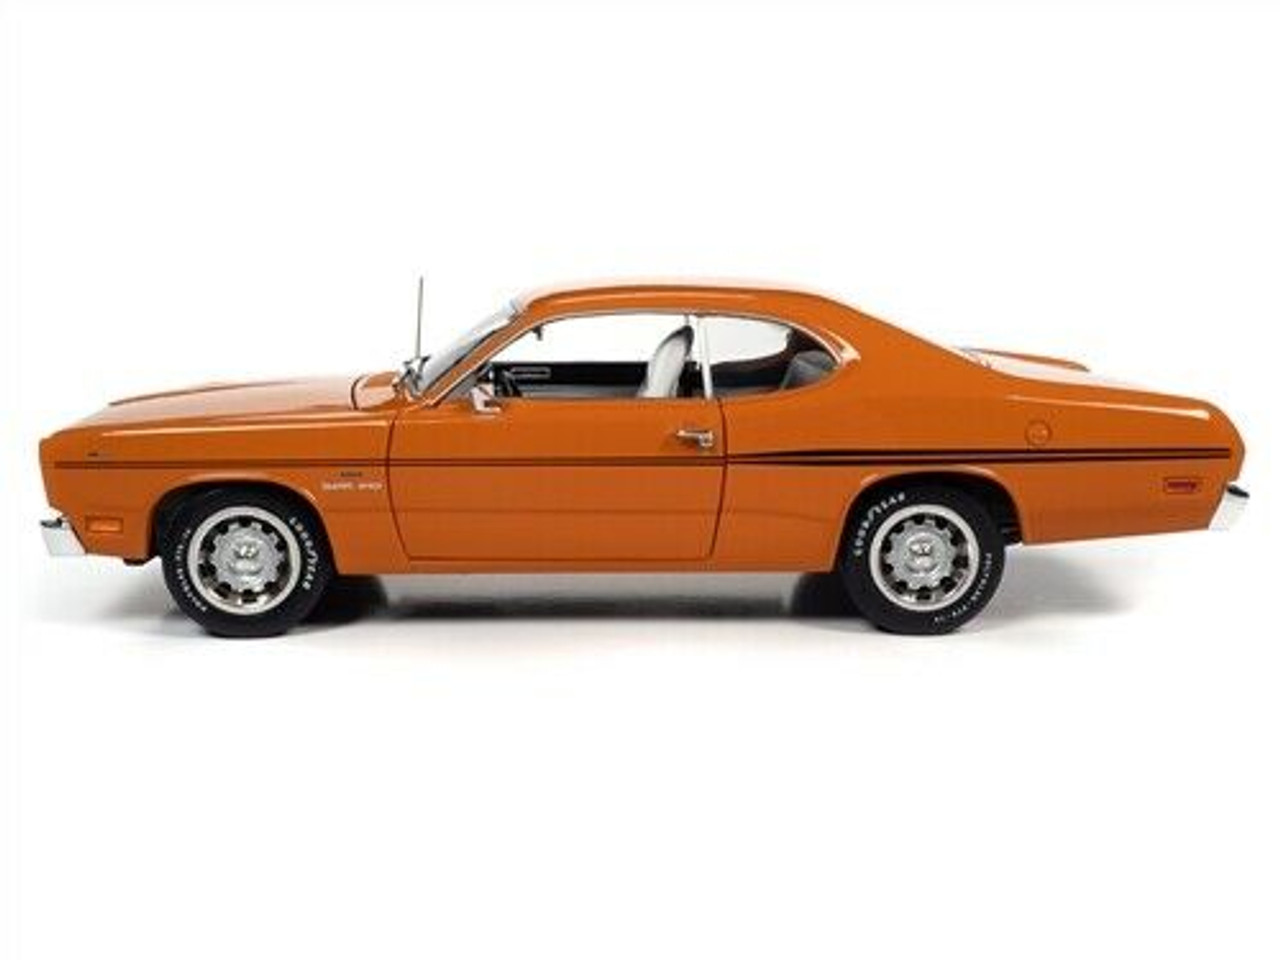 1/18 Auto World 1970 Plymouth Duster 340 Two-Door Coupe EK2 Vitamin C Orange with Black Stripes and White Interior "Class of 1970" Diecast Car Model